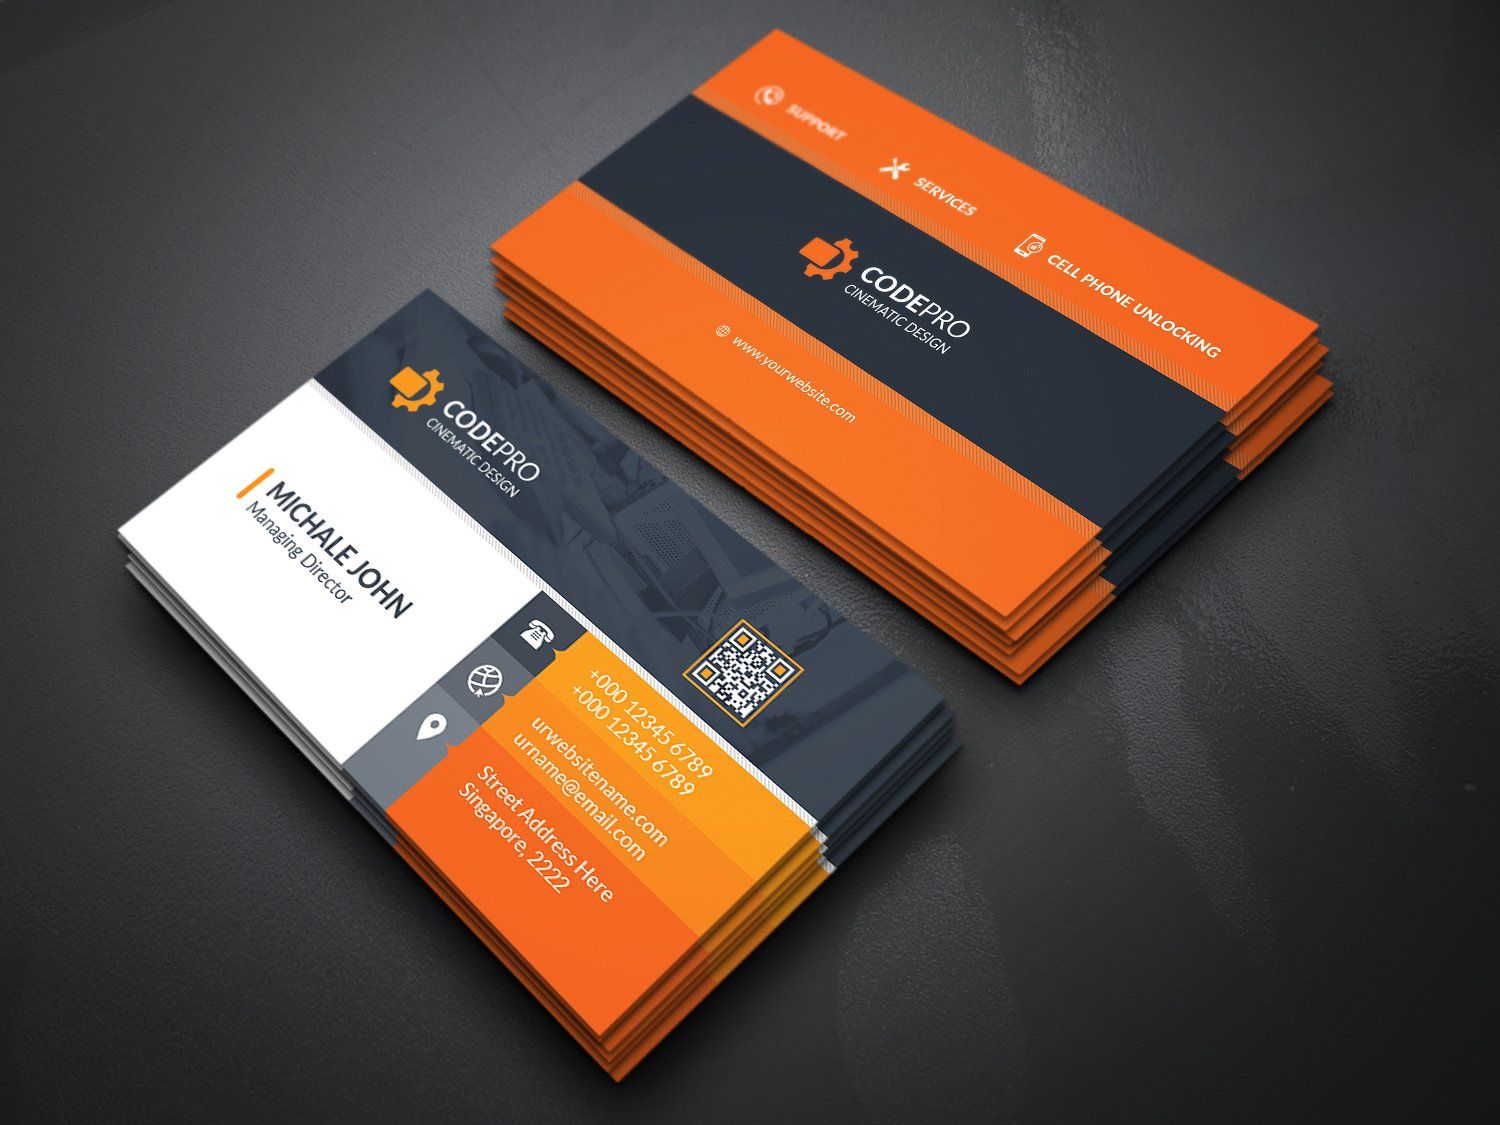 cell phone repair business cards 3